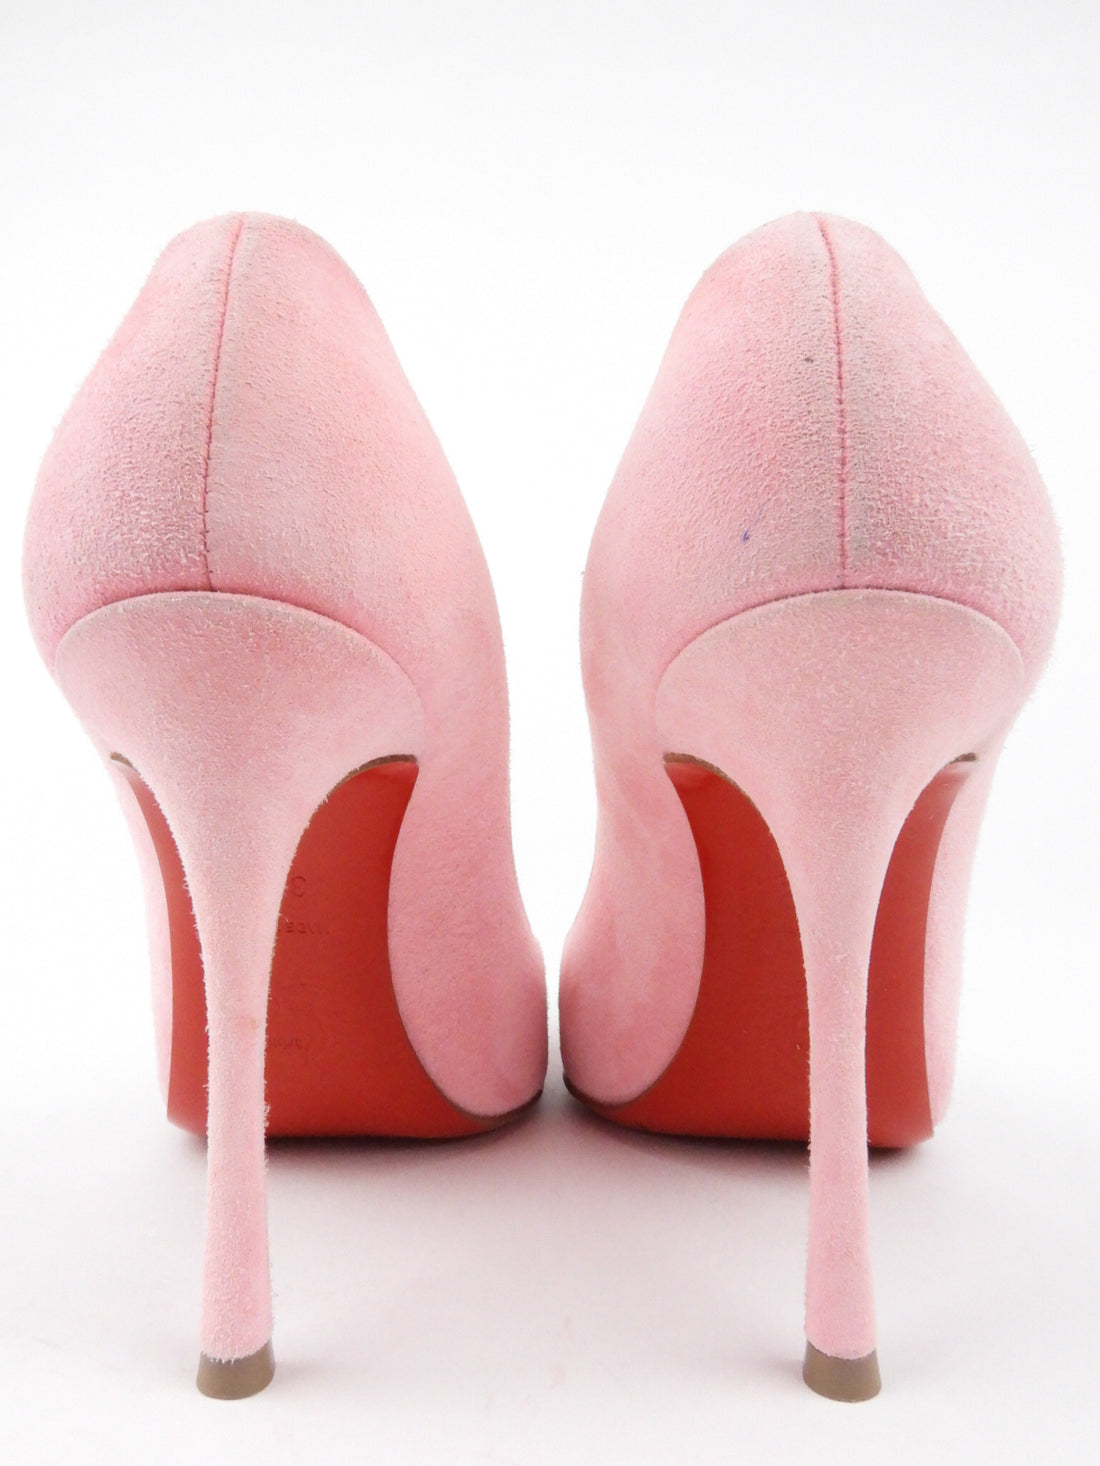 Christian Louboutin Pink Suede Crystal Embellished New Riche Peep Toe Pumps  Size 38 Christian Louboutin